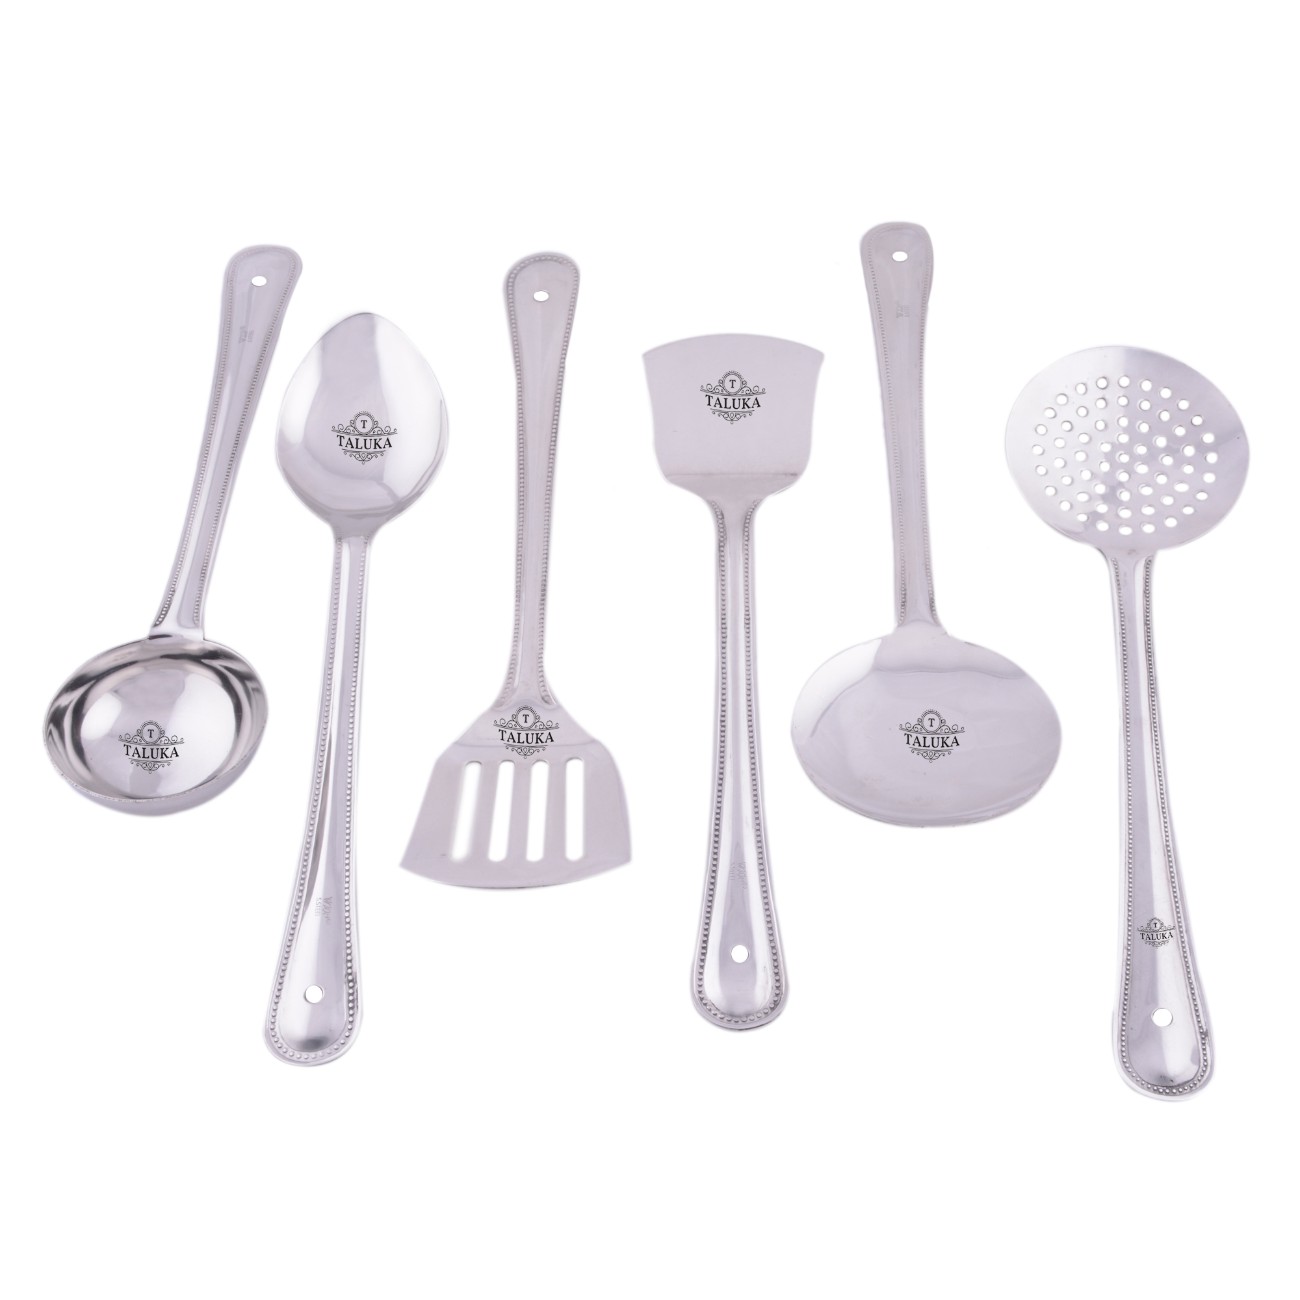 Stainless Steel Serving Cooking Kitchen Combo Set of 6 Different Spatula Ladle Spoons